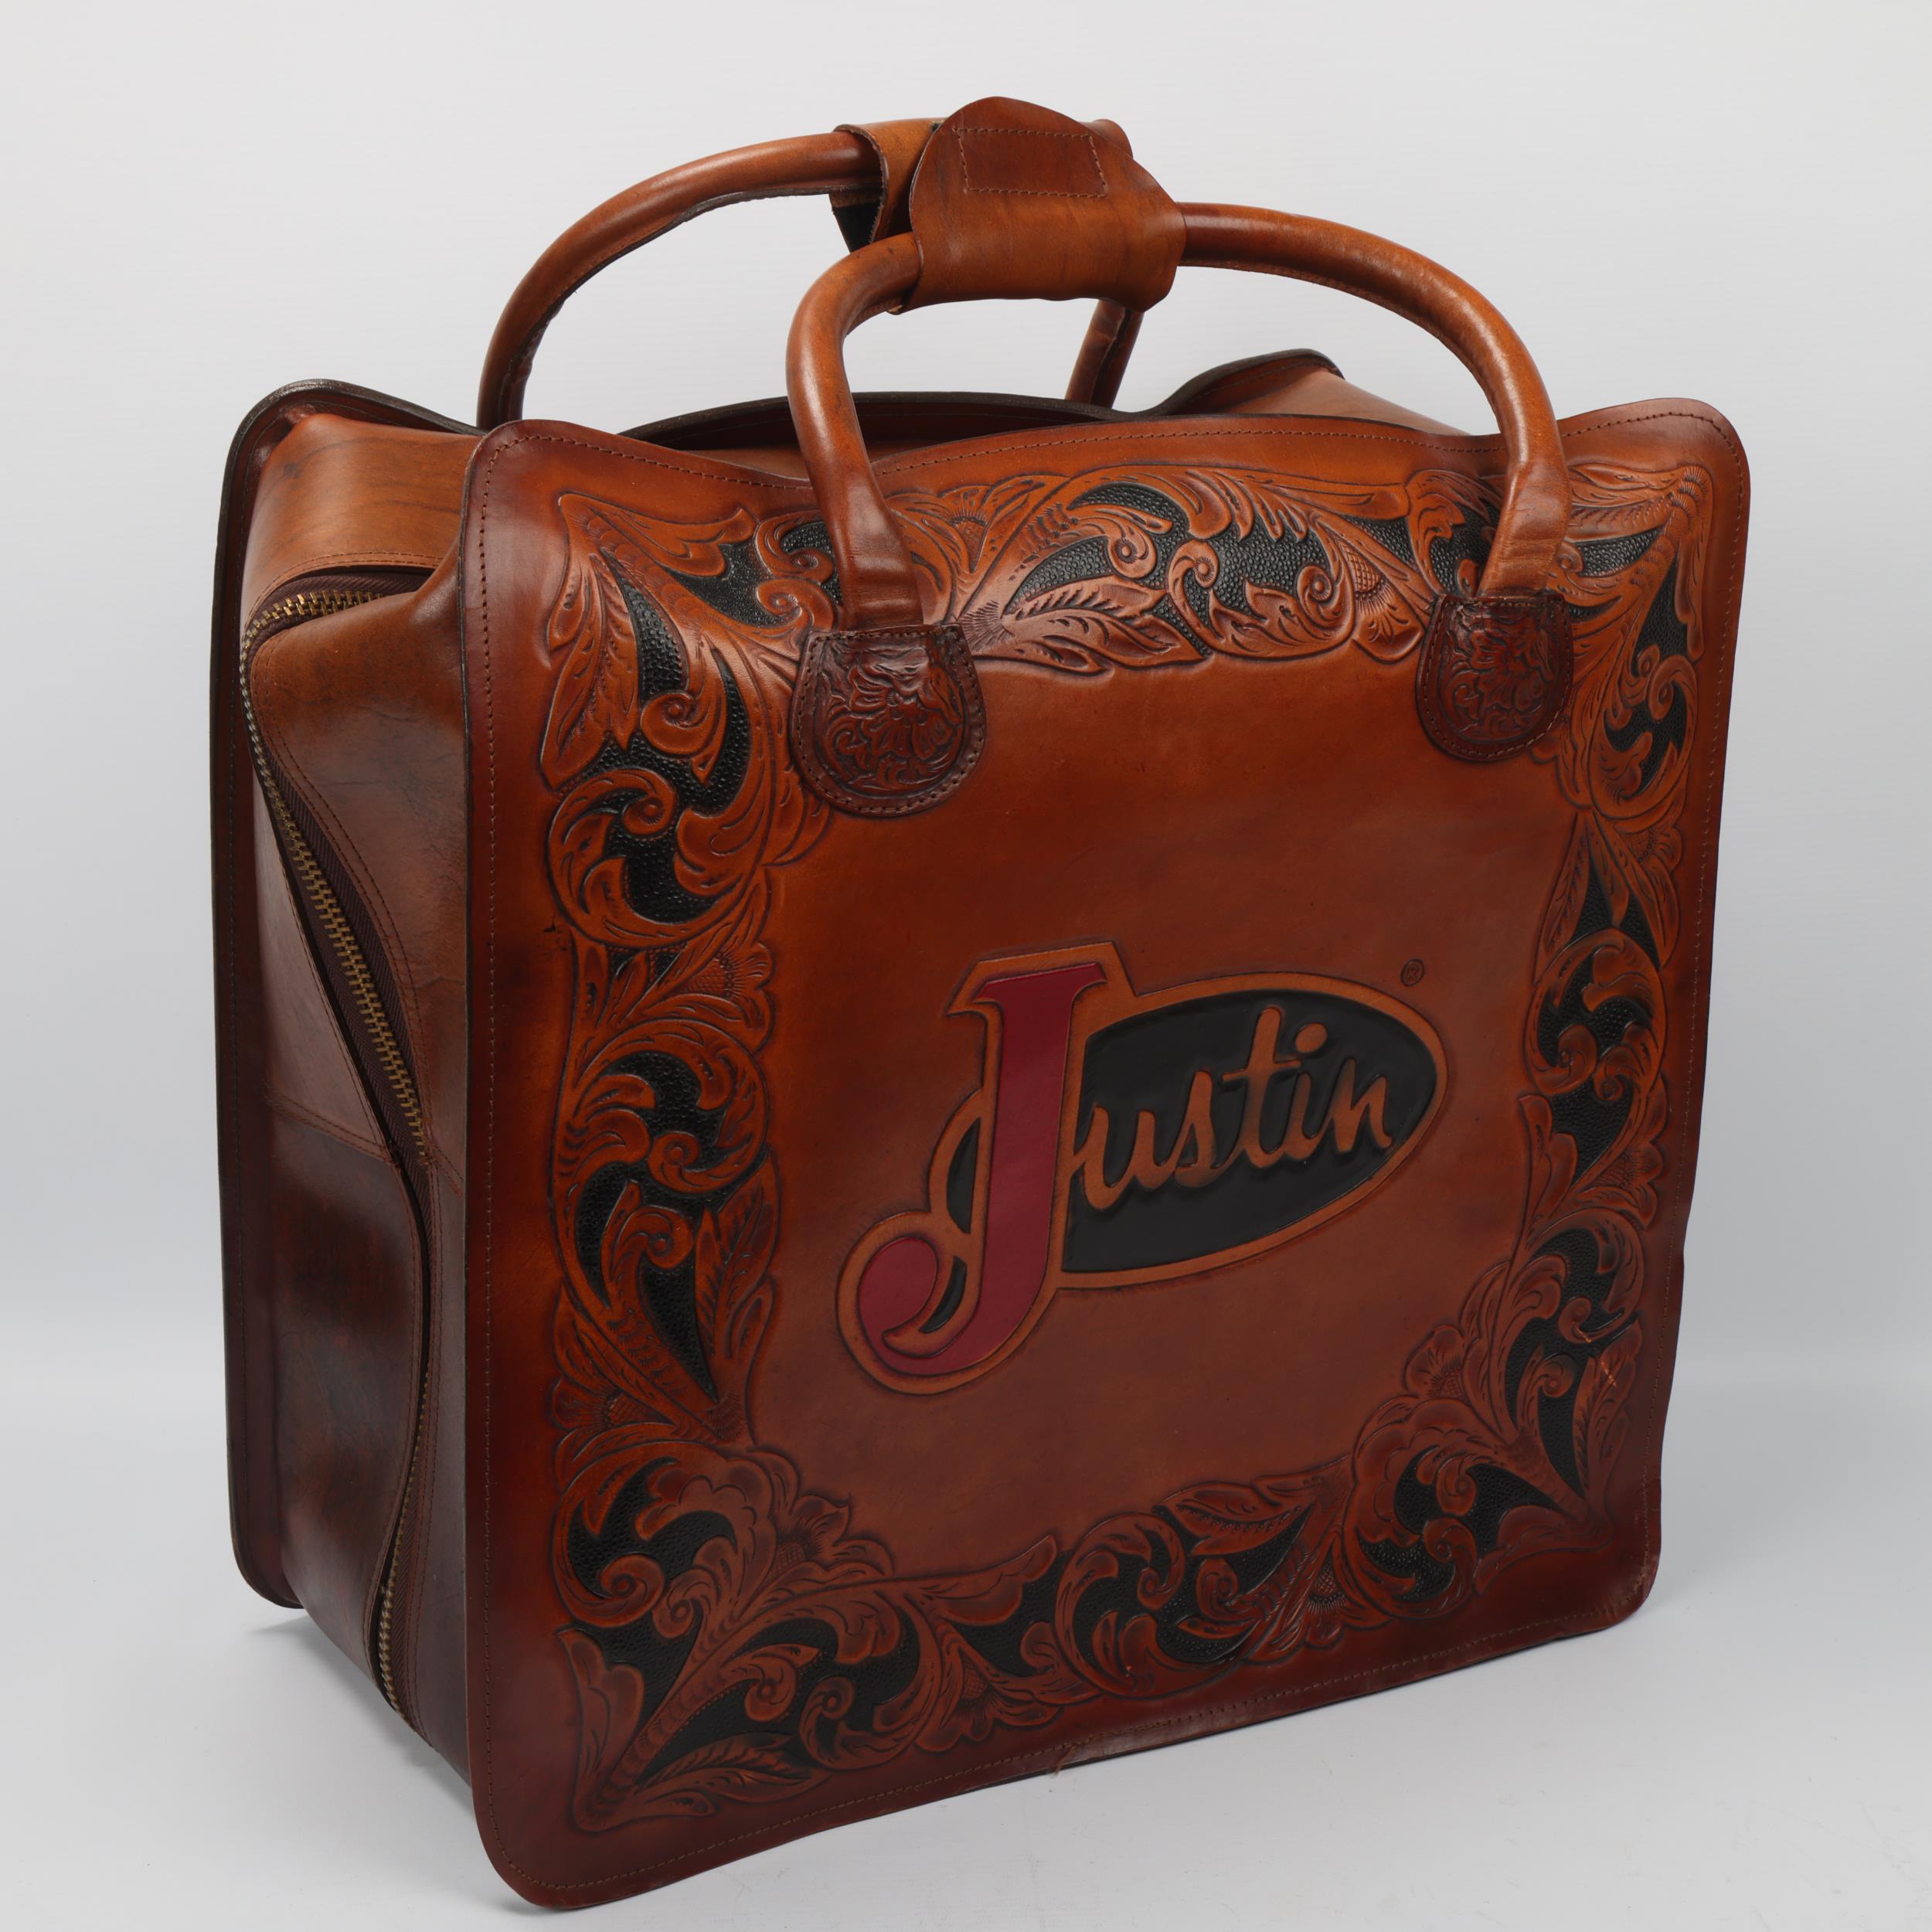 JIMI HENDRIX / MITCH MITCHELL INTEREST - A 'Justin' Brand (USA) Leather Bowling Bag. Measures - Image 2 of 3